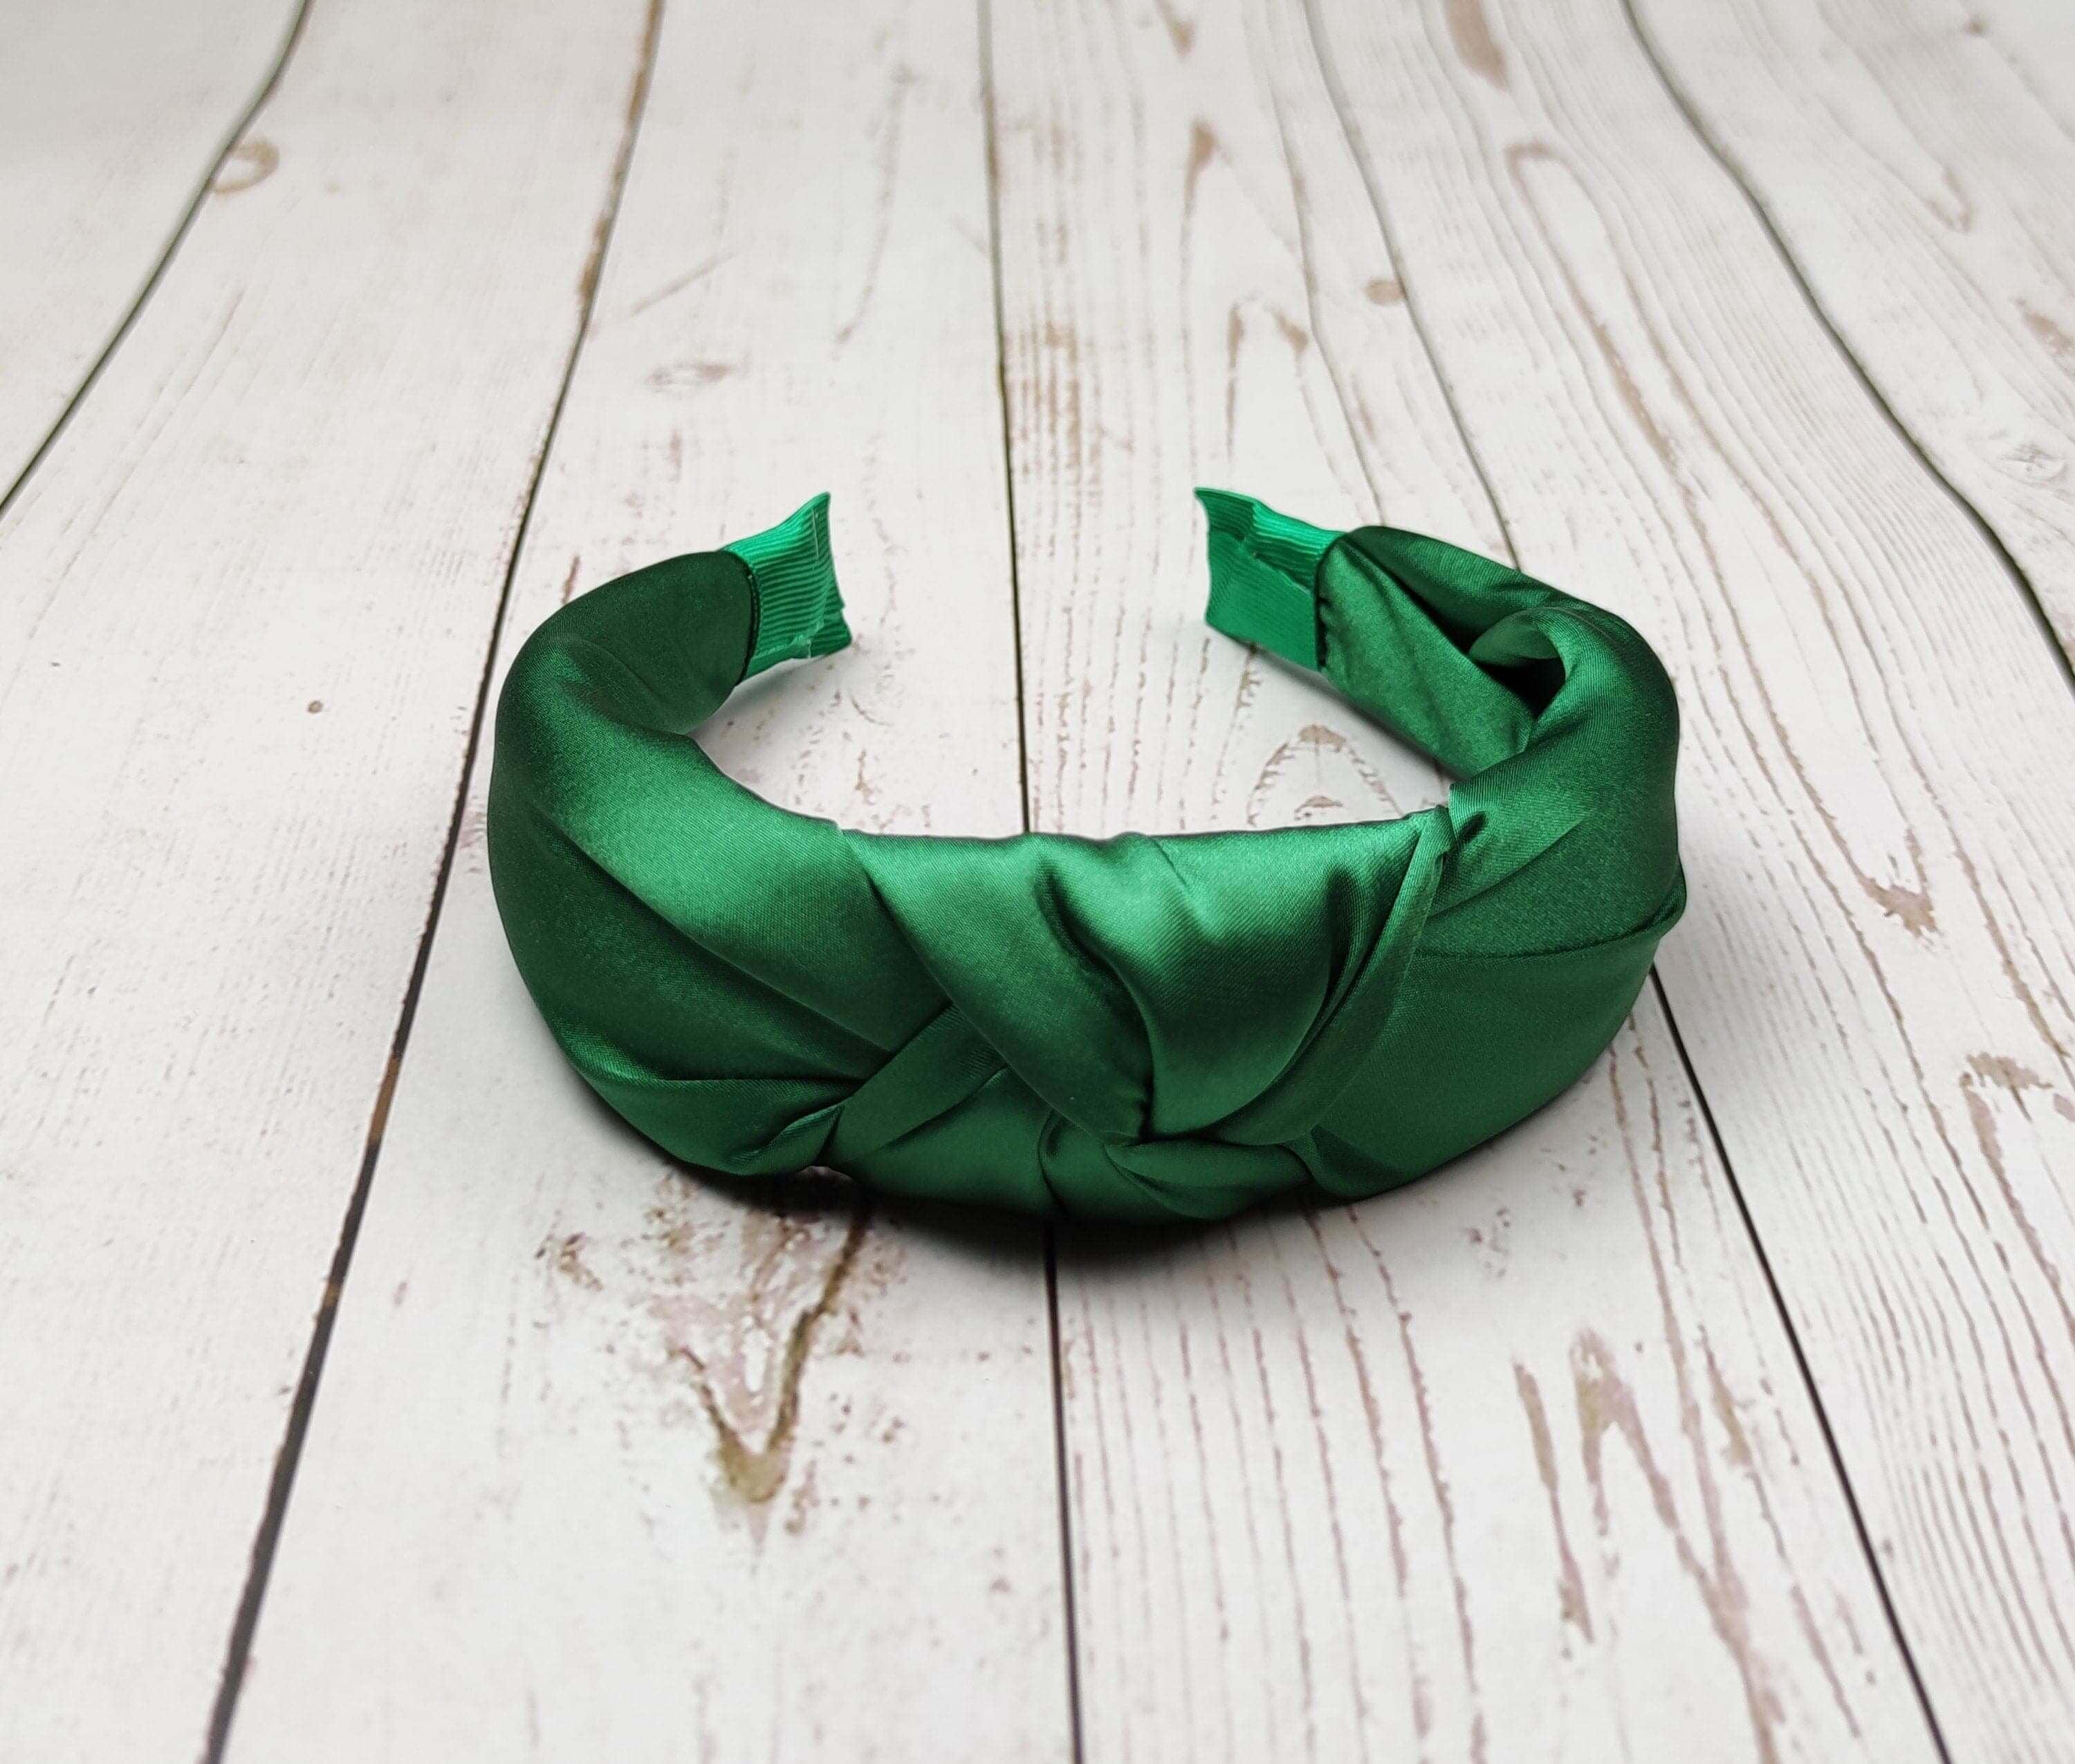 Charming Emerald Green Padded Satin Knot Headband - A Timeless and Fashionable Hair Accessory for Women available at Moyoni Design